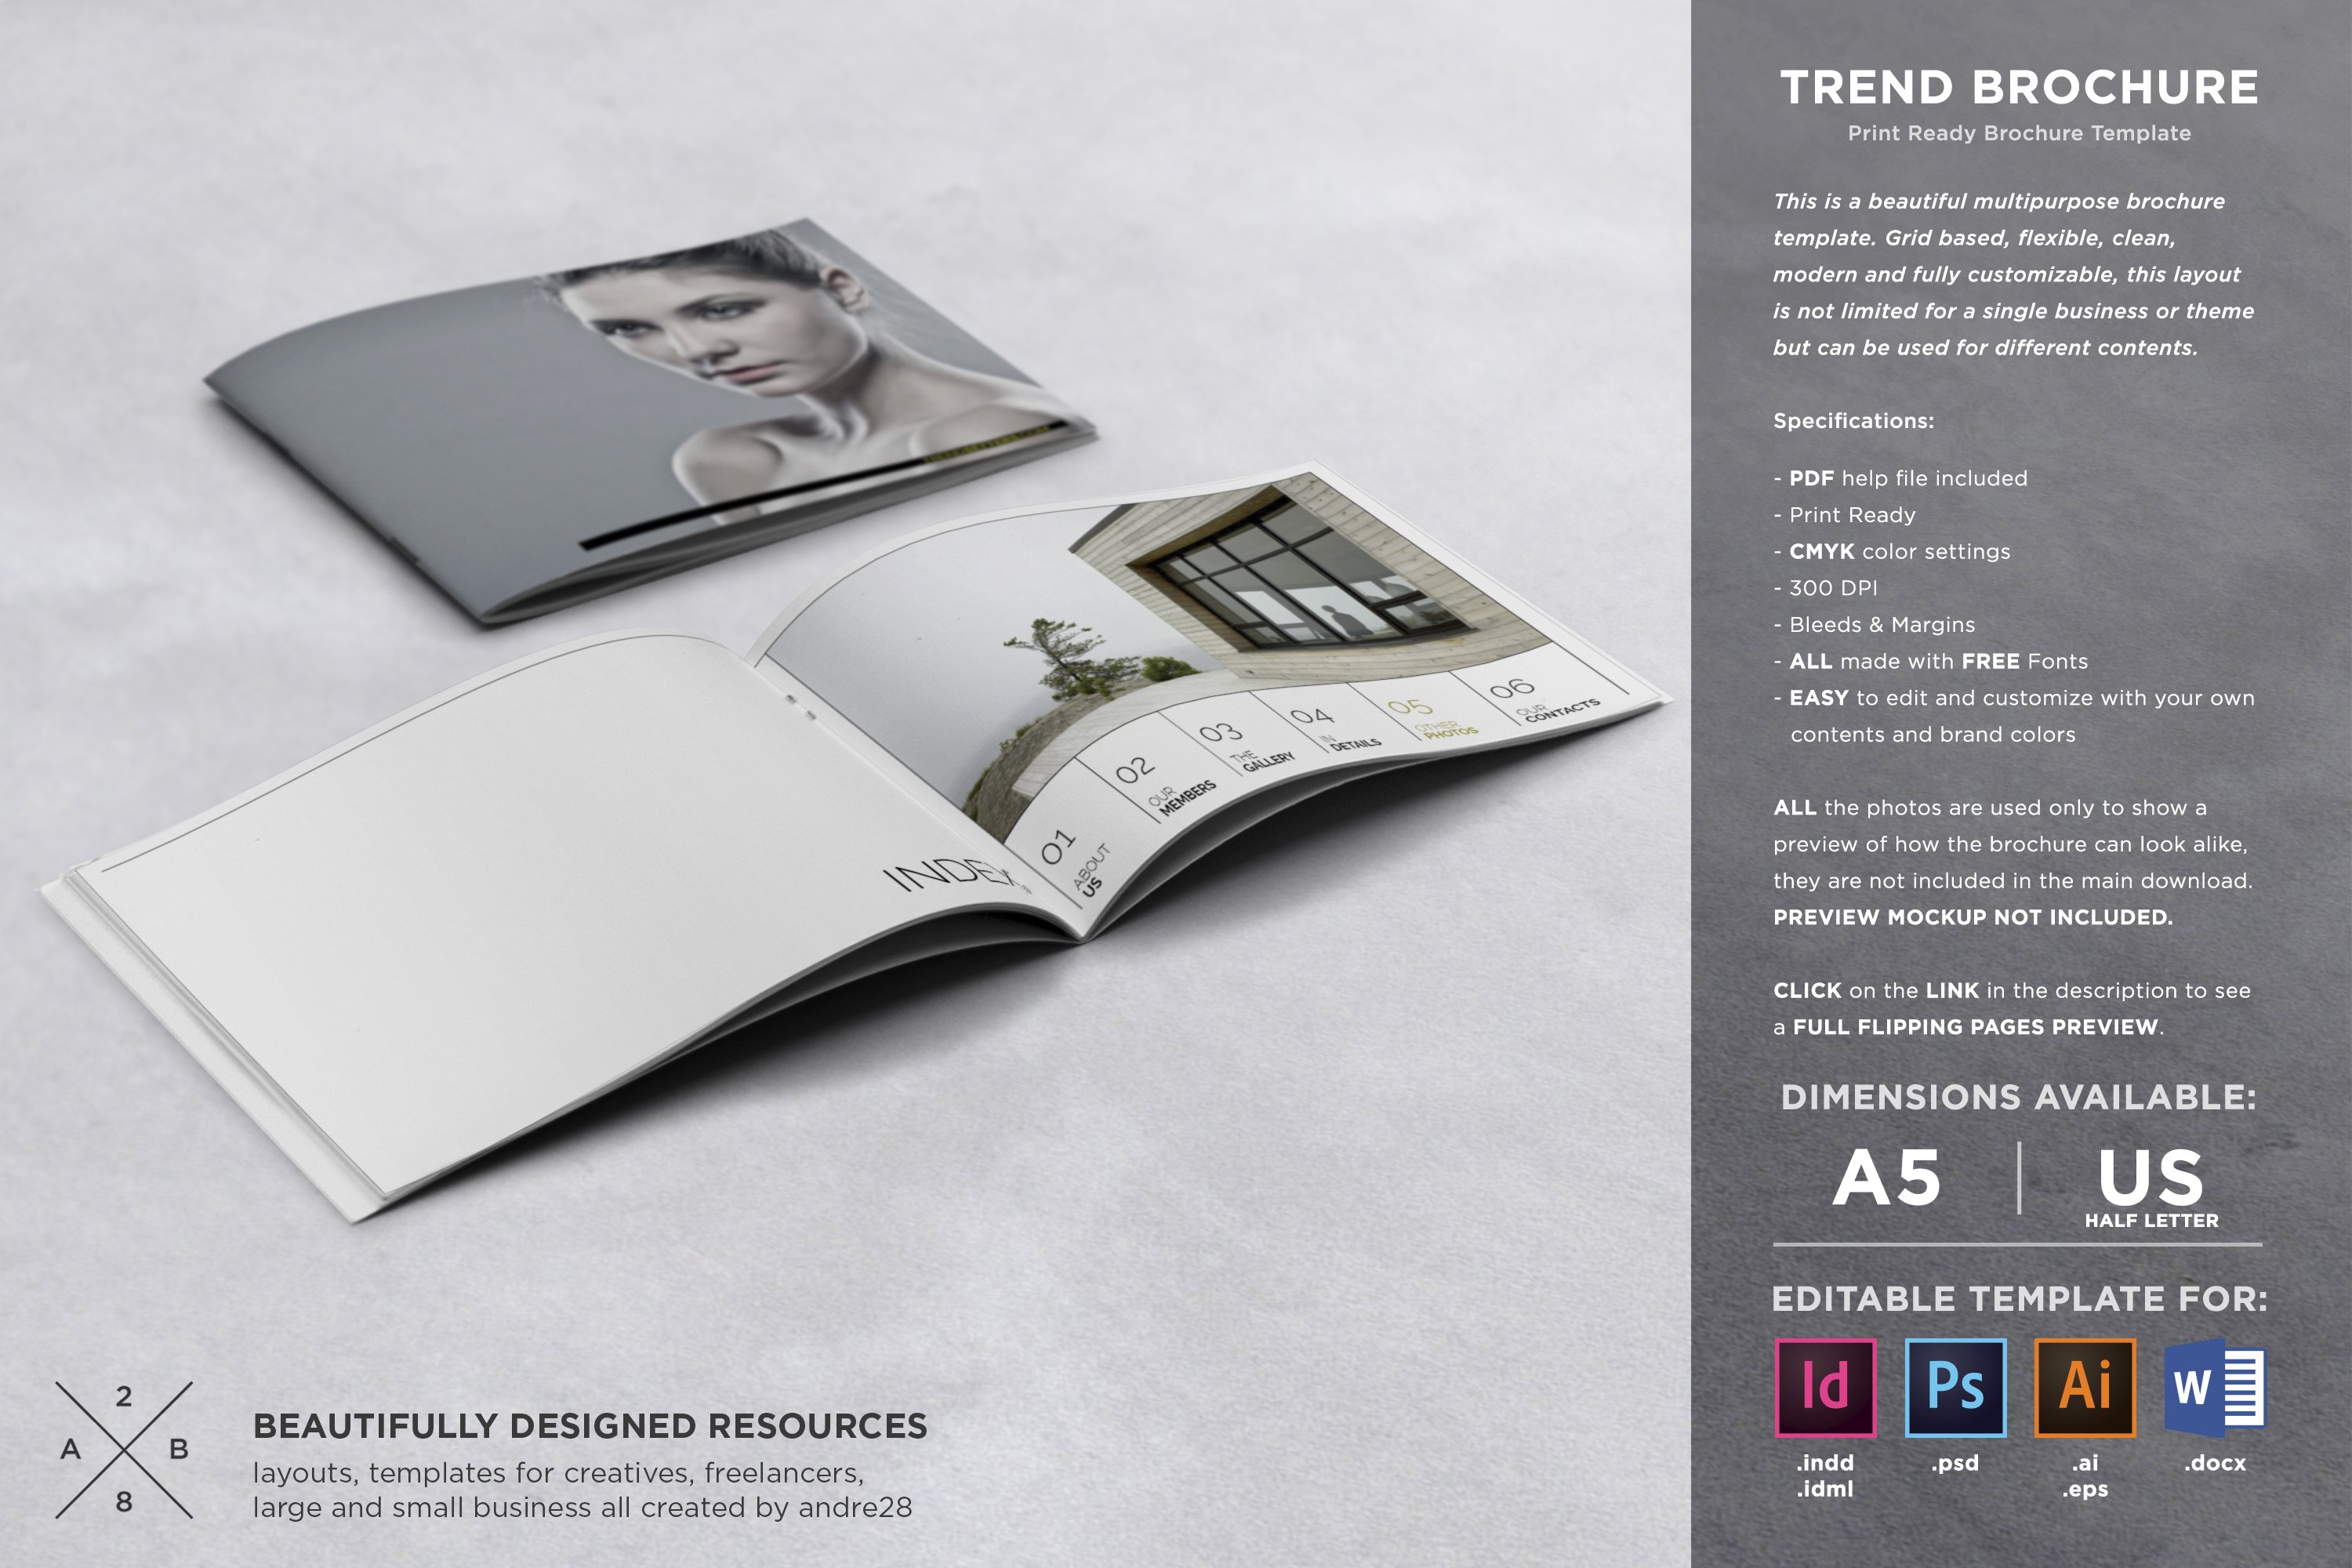 Trend Brochure Template cover image.